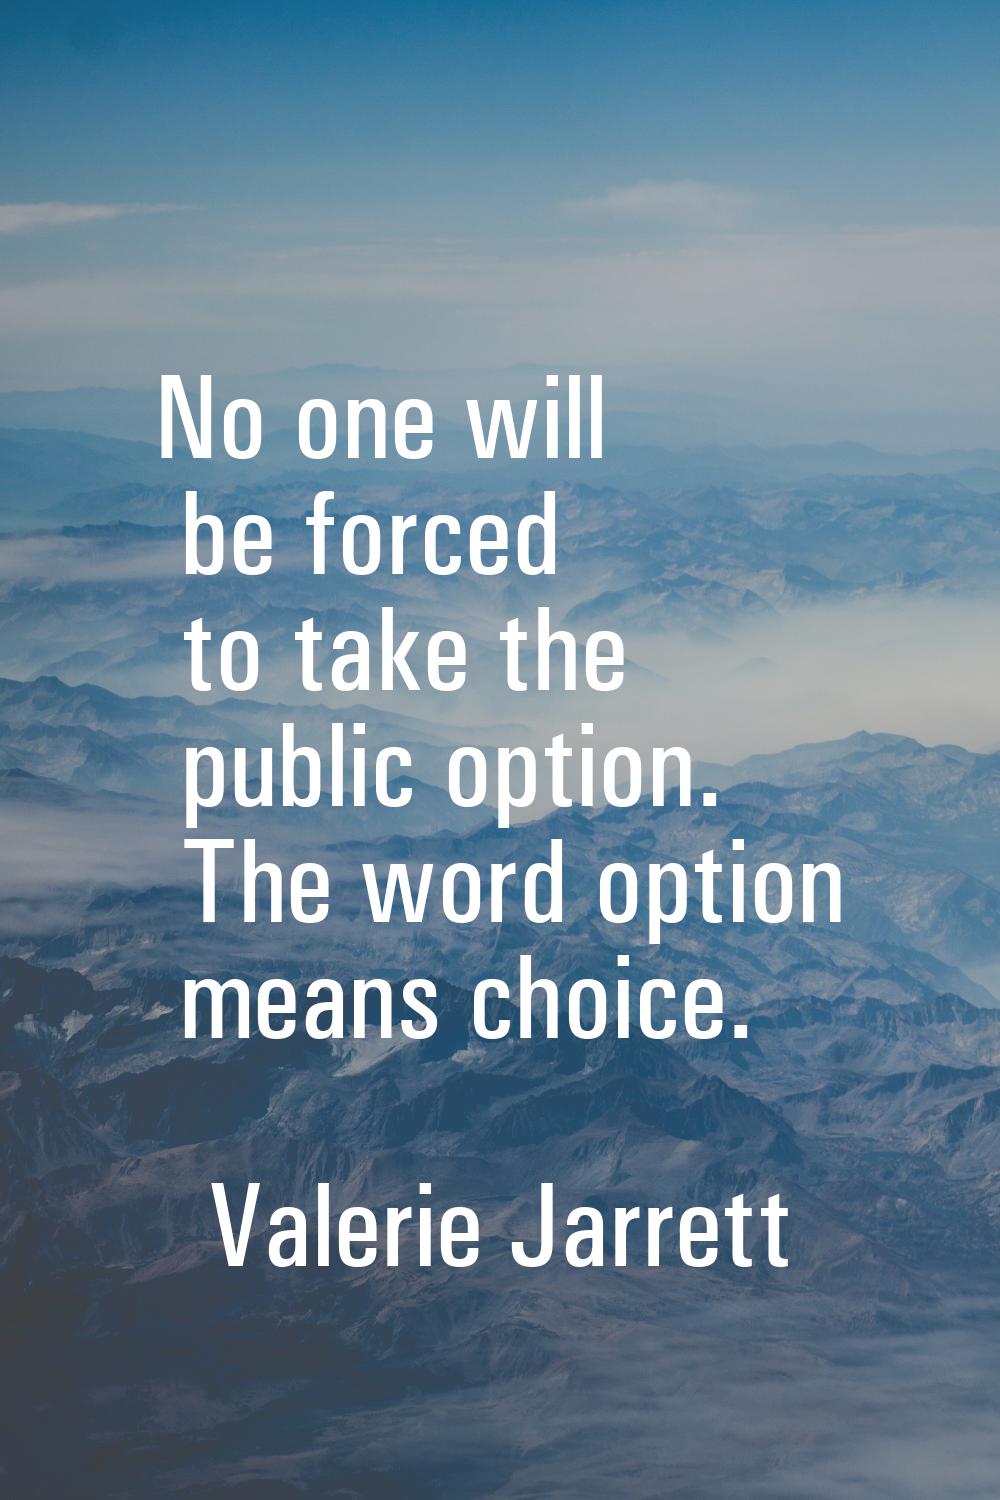 No one will be forced to take the public option. The word option means choice.